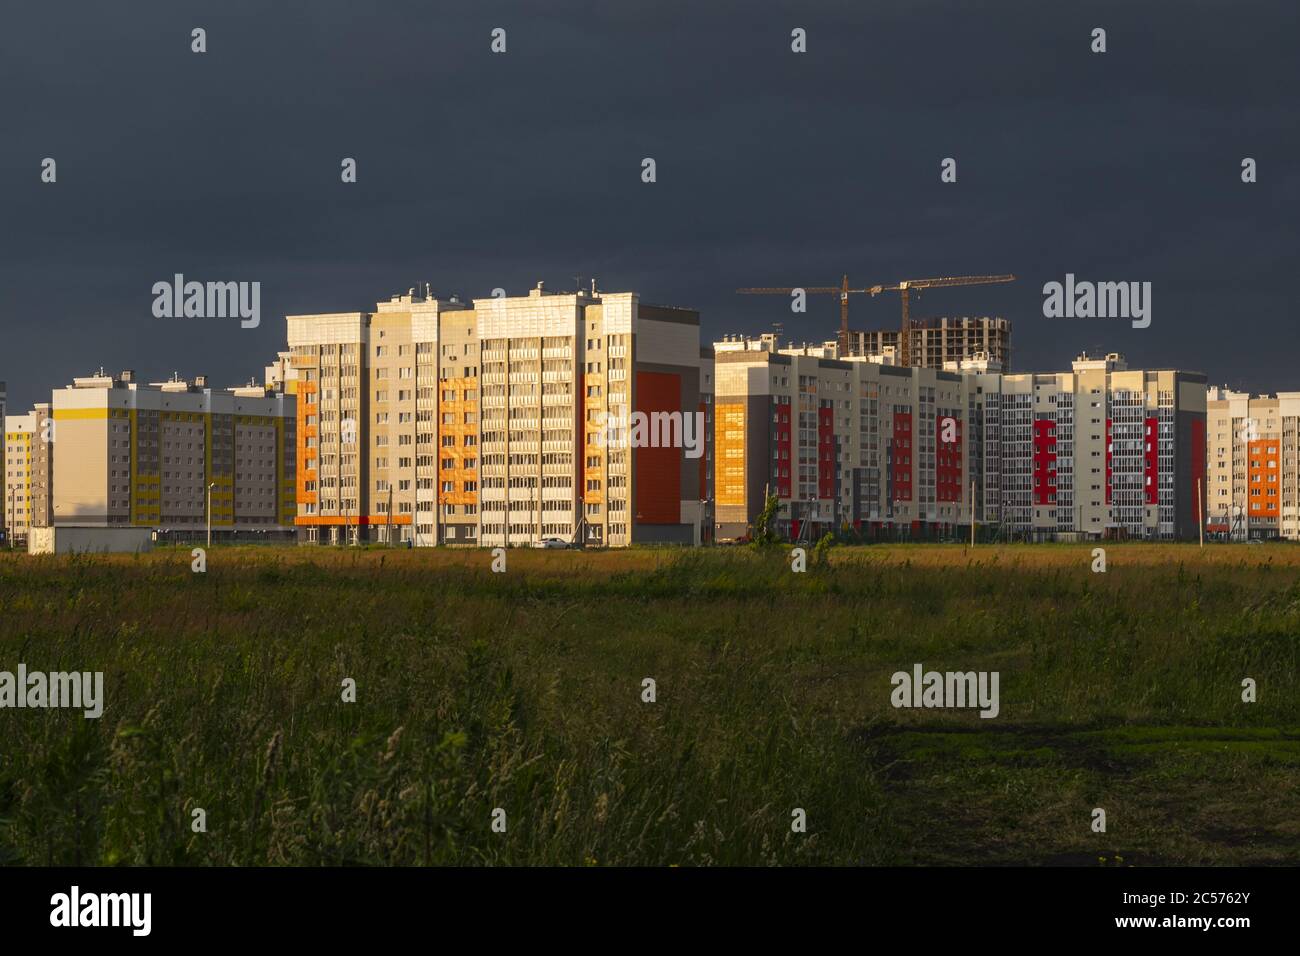 A Horizontal Shot Of Buildings At The Construction Site Under A Cloudy Sky At Sunset Stock Photo Alamy